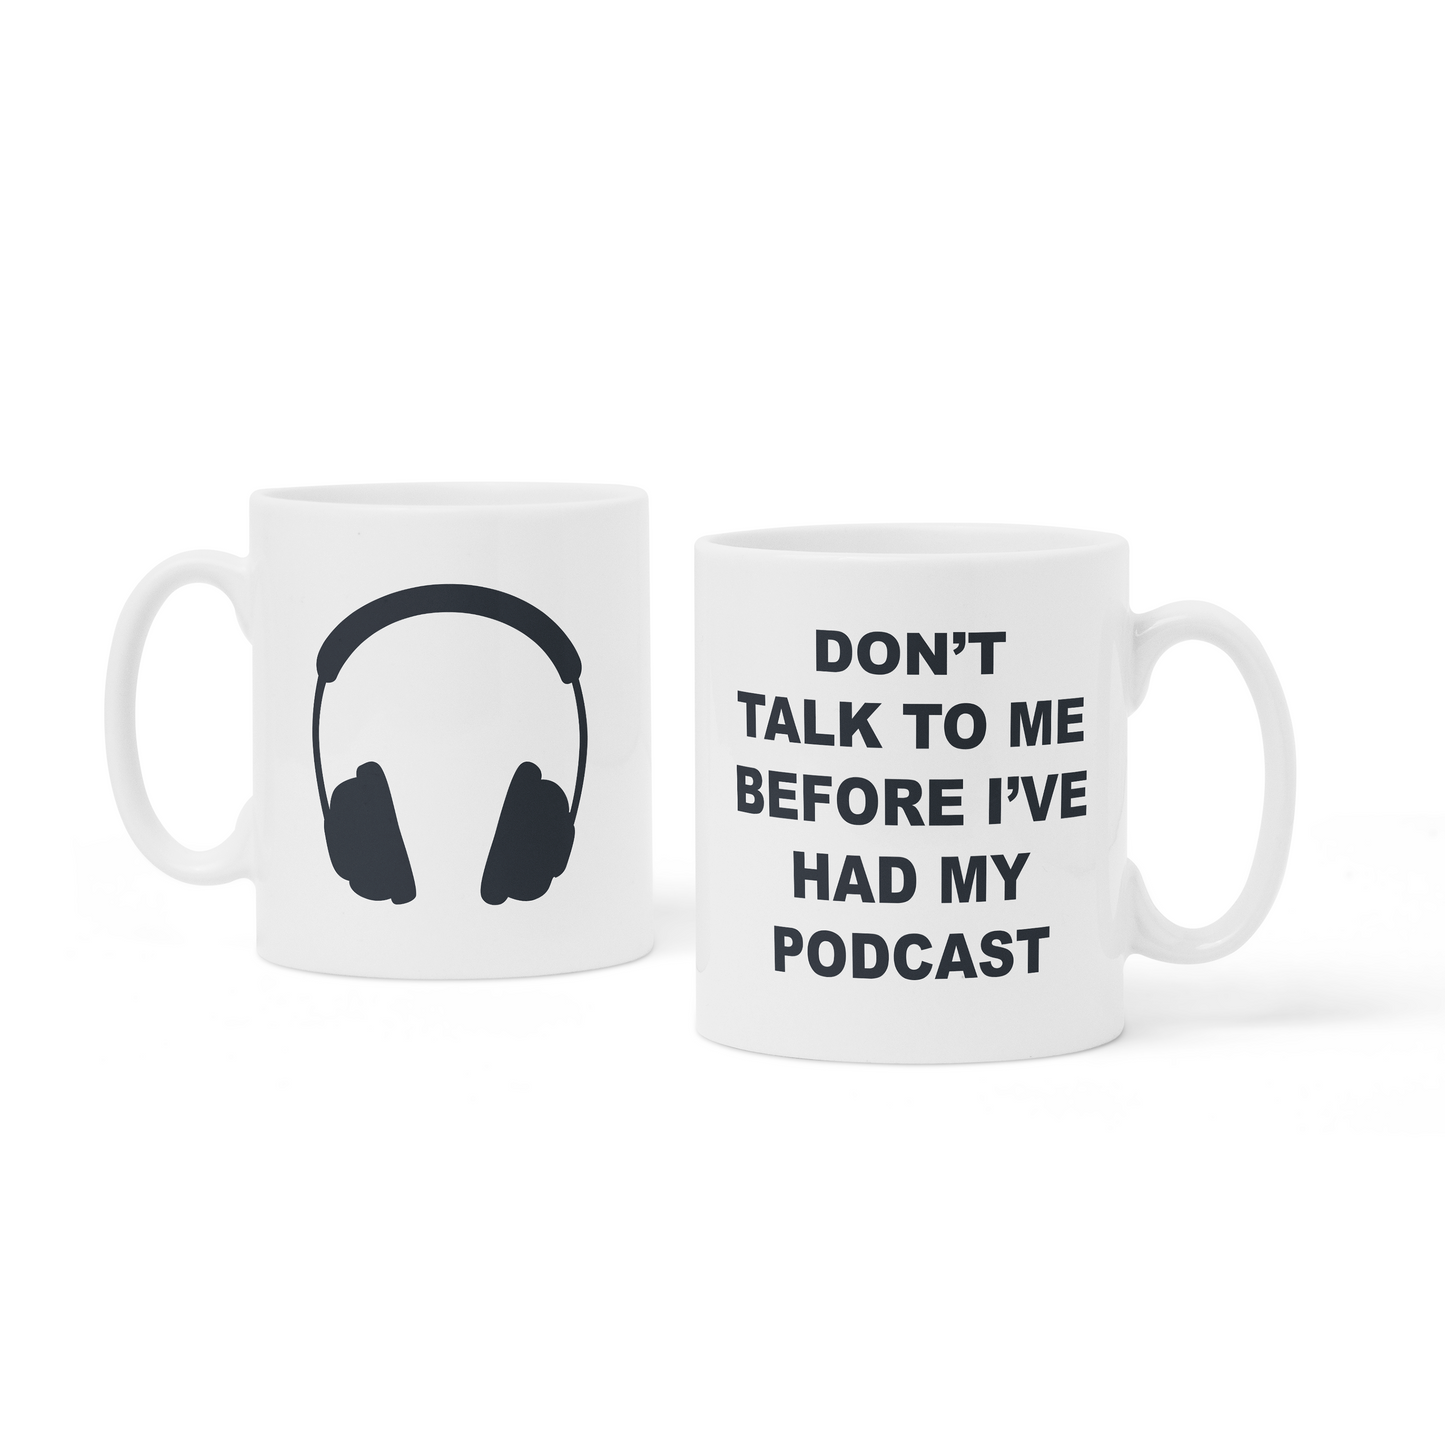 Mug: A plain white mug. The front says, “Don’t talk to me before I’ve had my podcast,” in a black sans serif. The back has an illustration of headphones in black.